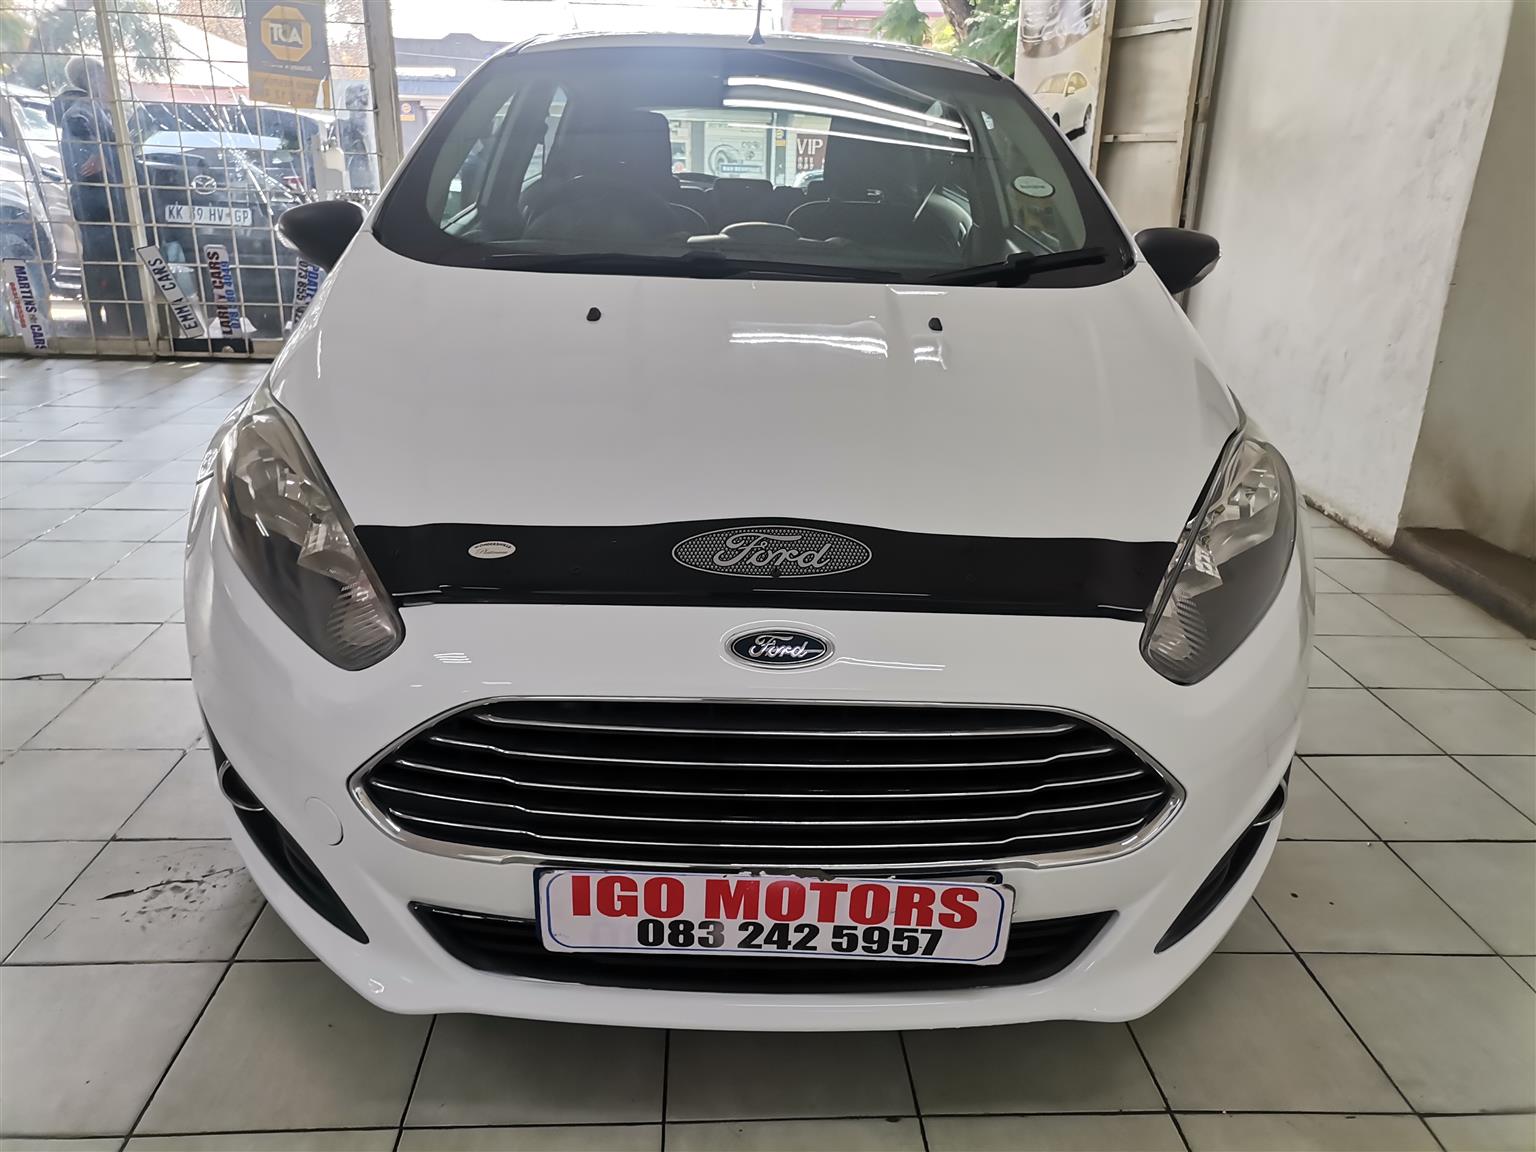 2017 FORD FIESTA 1.4 MANUAL  Mechanically perfect with Full Service Hist